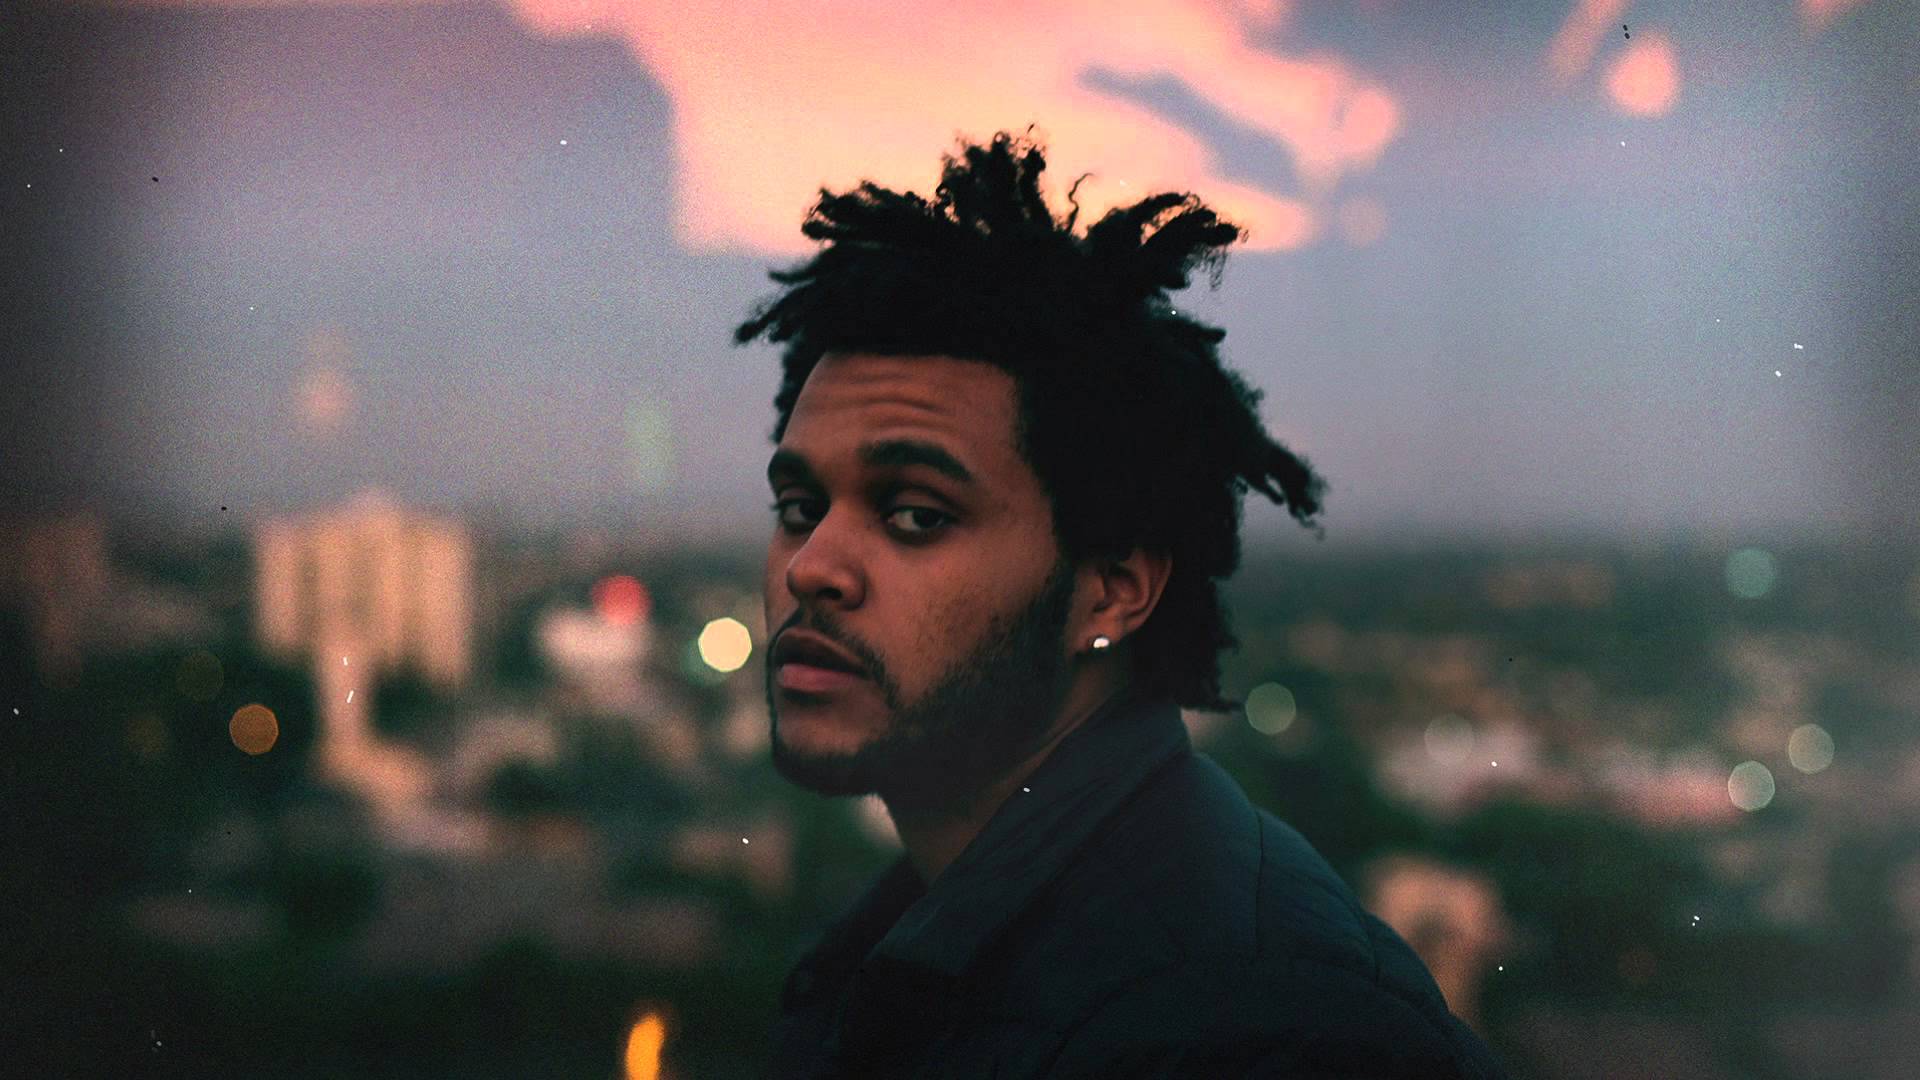 THE WEEKND ESTRENA SHOW PARA "THE DAWN FM EXPERIENCE"